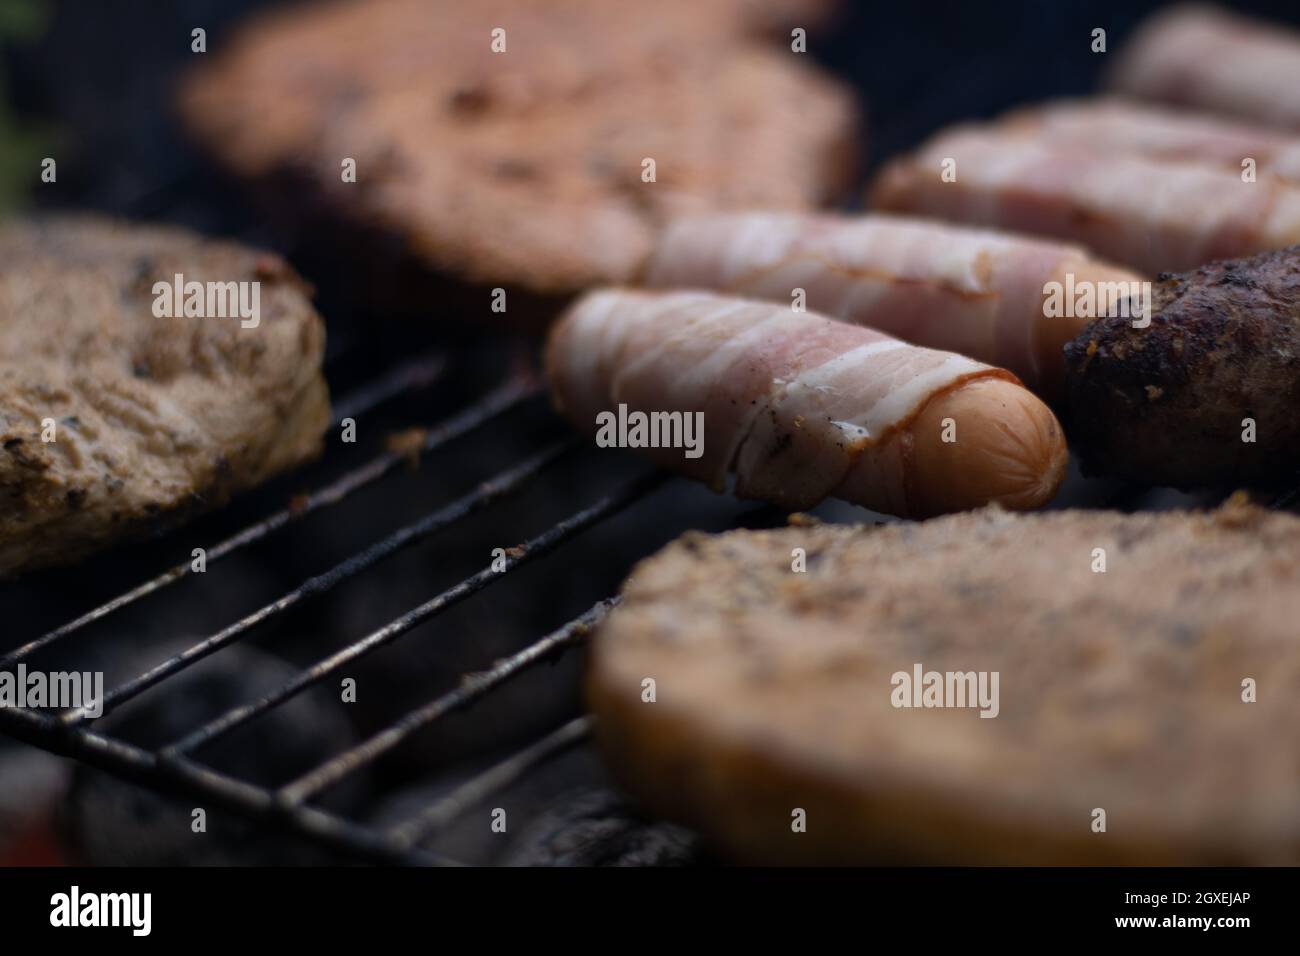 Sausages and pieces of meat laying on a grill at a Barbeque Stock Photo